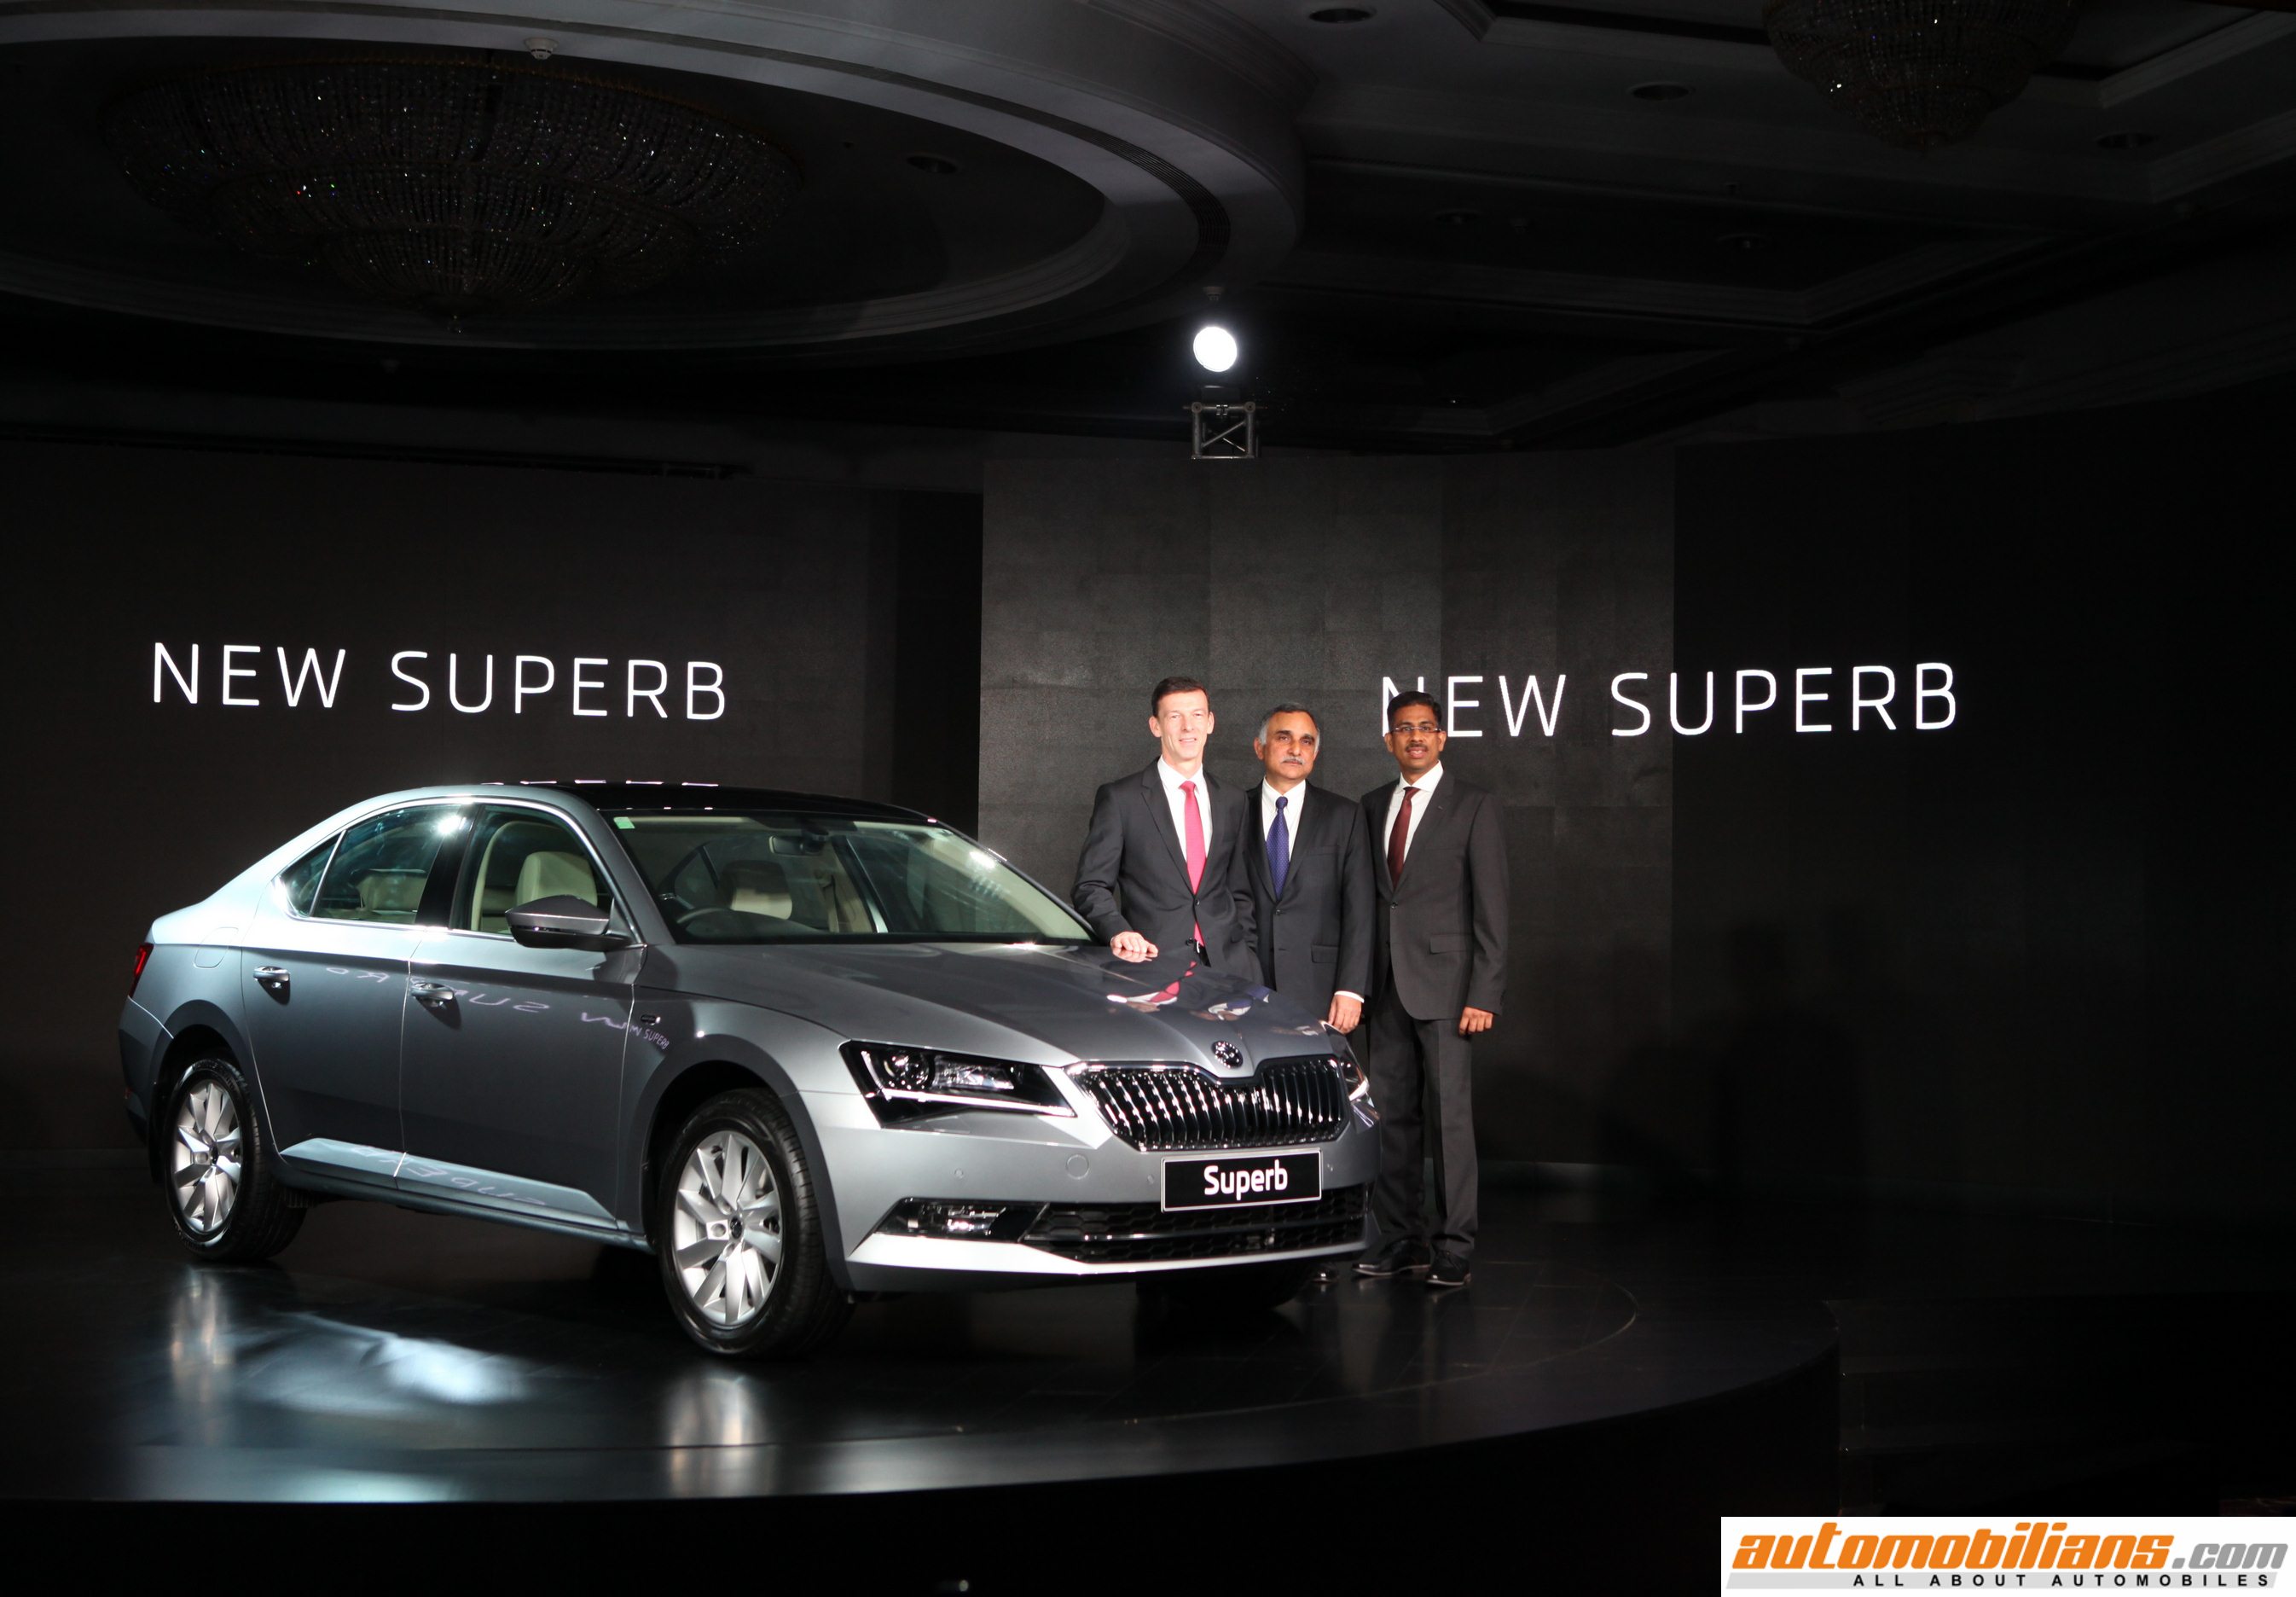 2016 Skoda Superb Launched In India At Rs. 22.68 Lakhs (Ex-Showroom, Mumbai)